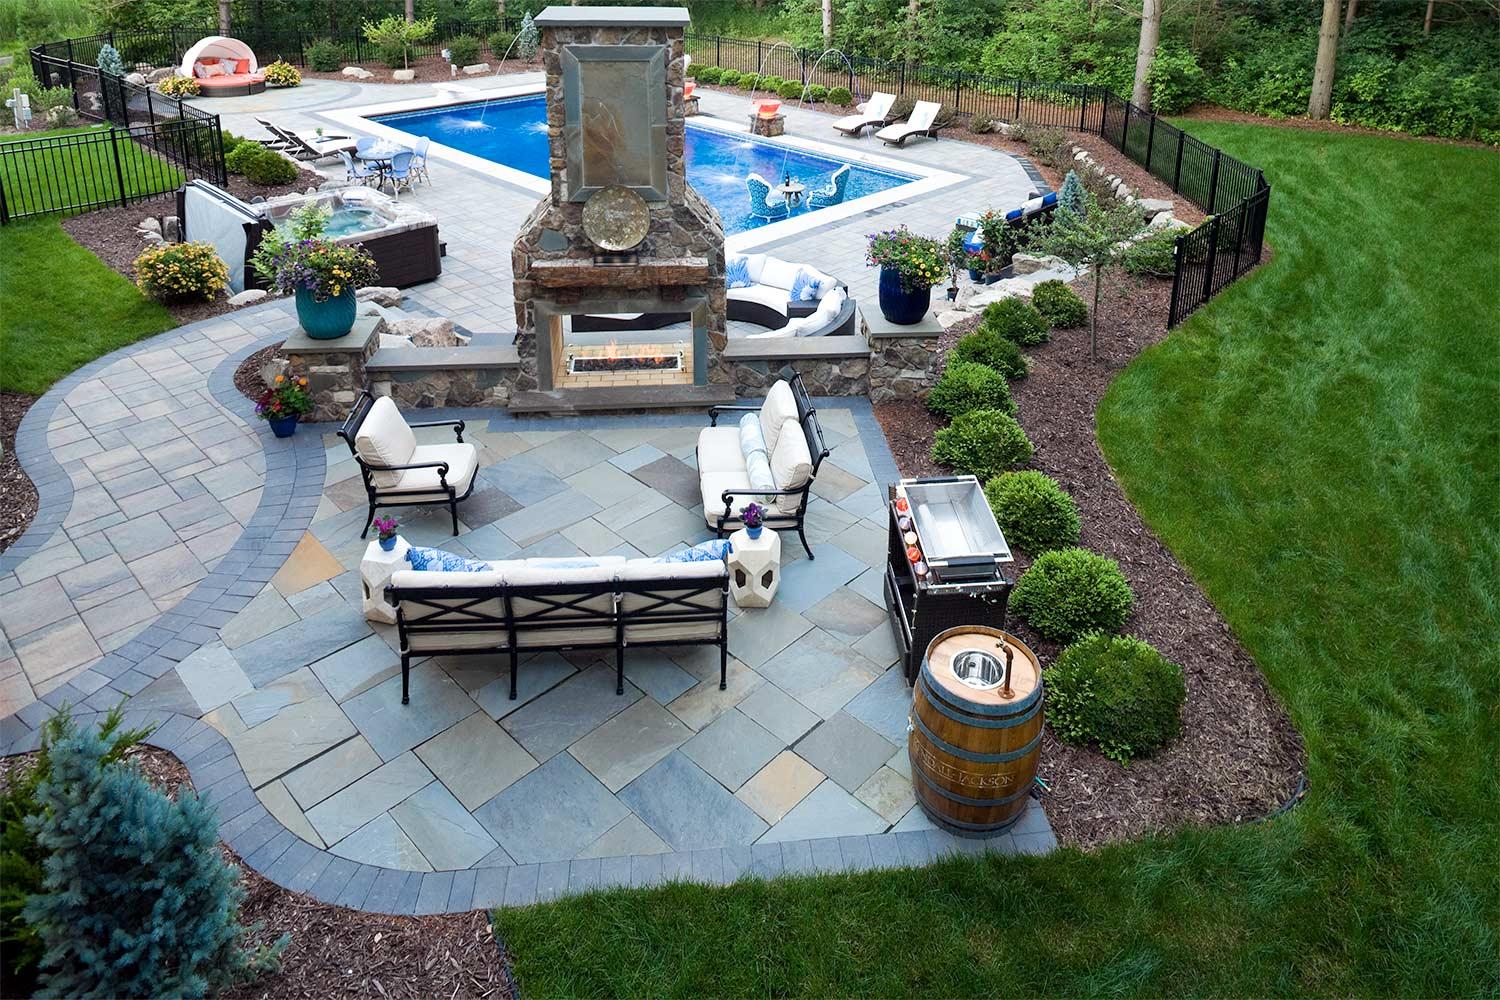 Bluestone patio with statement fireplace and unique bar set.